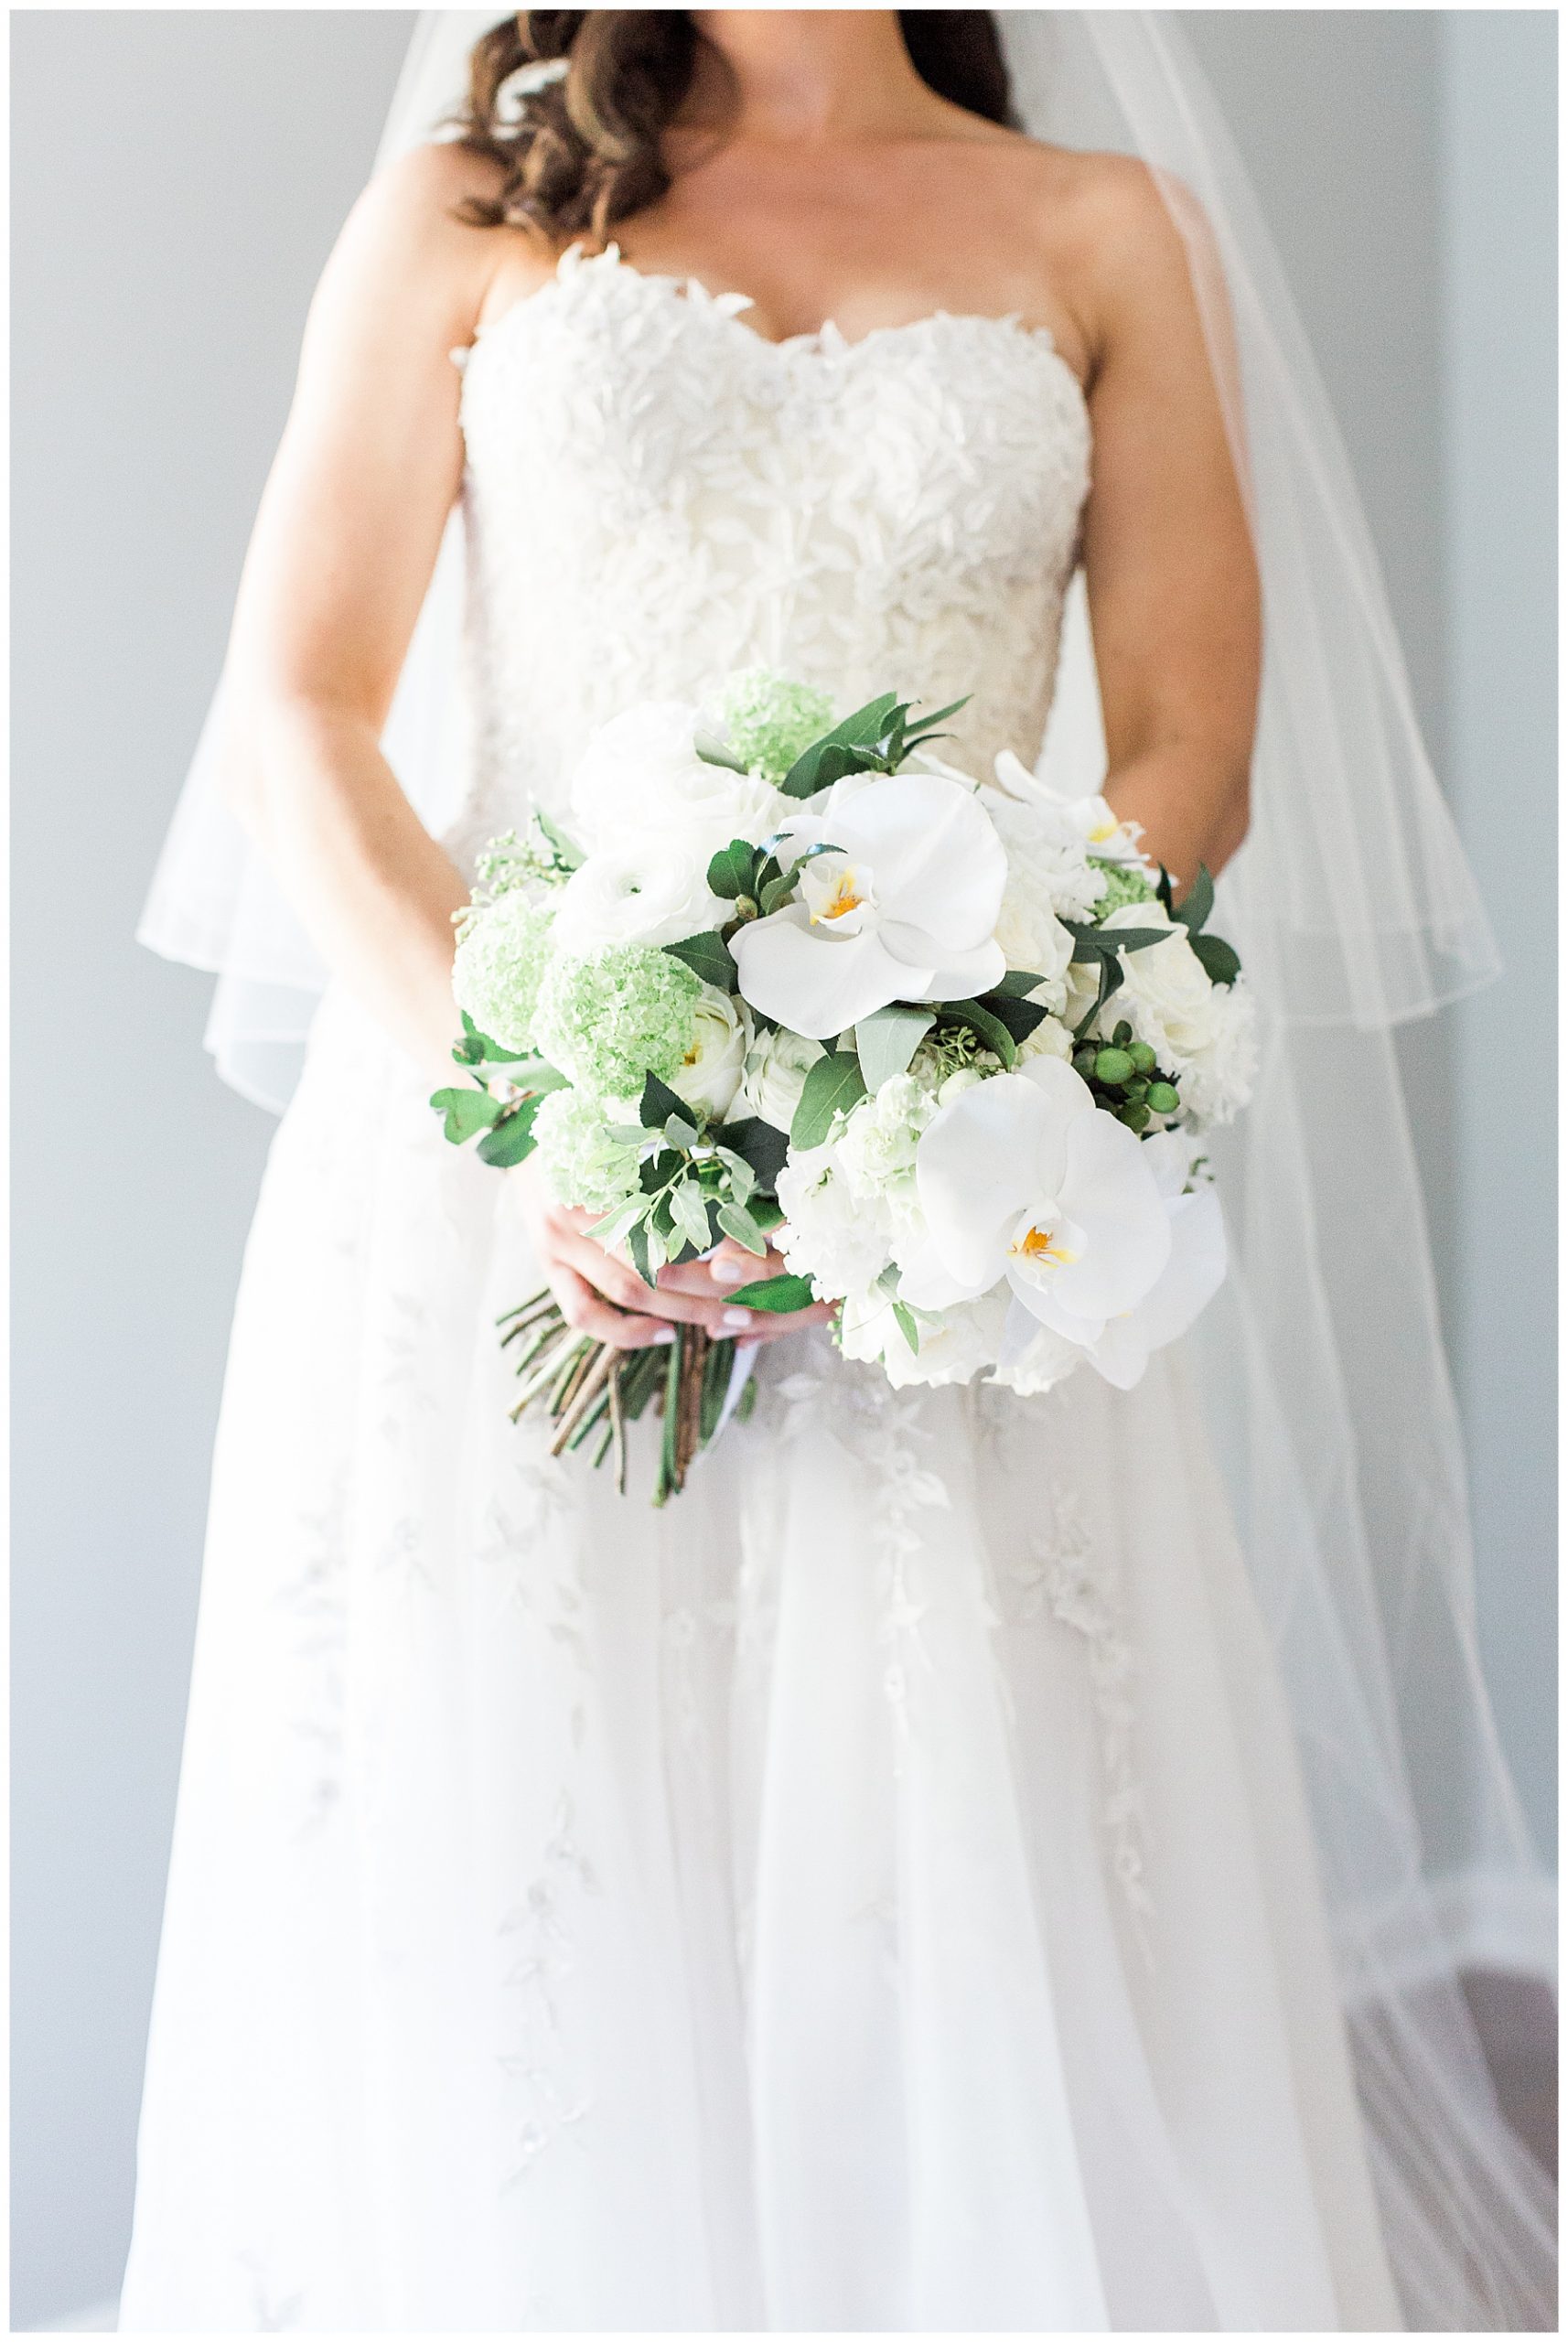 Westchester_Bride_Kristina_Staal_Photography.jpg